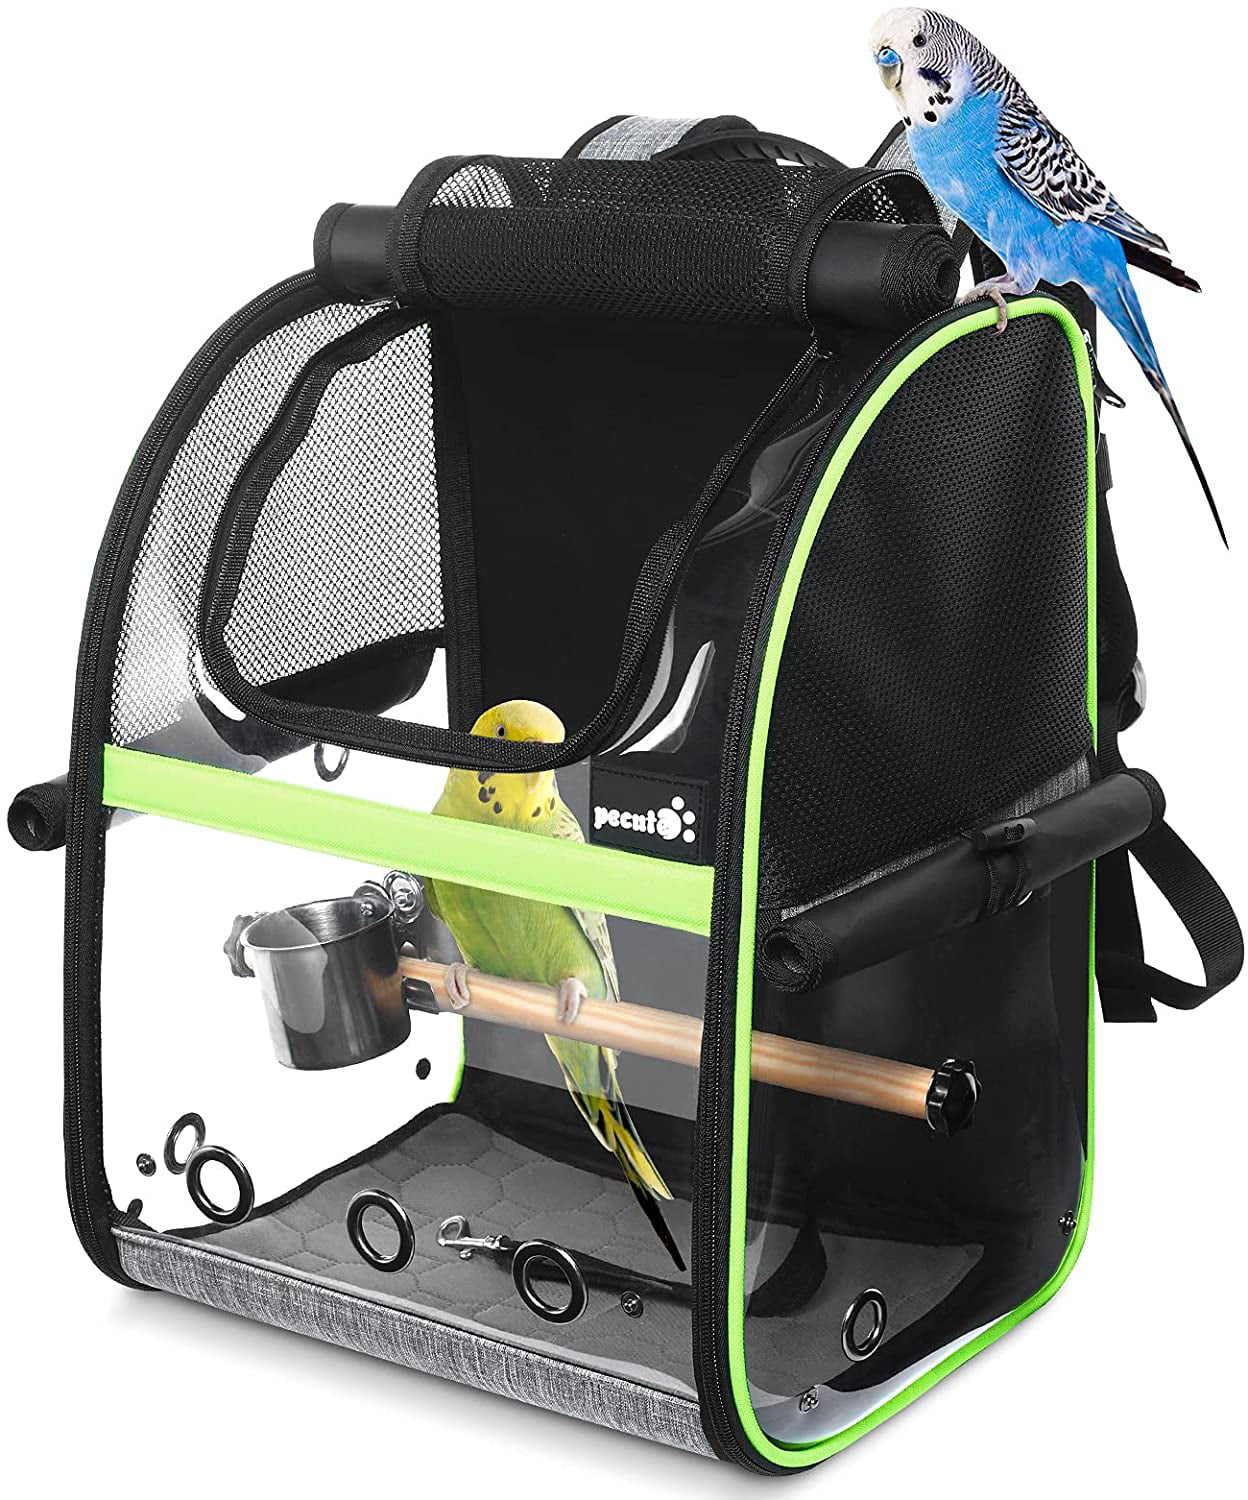 Bird Carrier with Perch and Feeding Cups,Portable Bird Travel Cage Lightweight Breathable,Bird Backpack for Parrot 